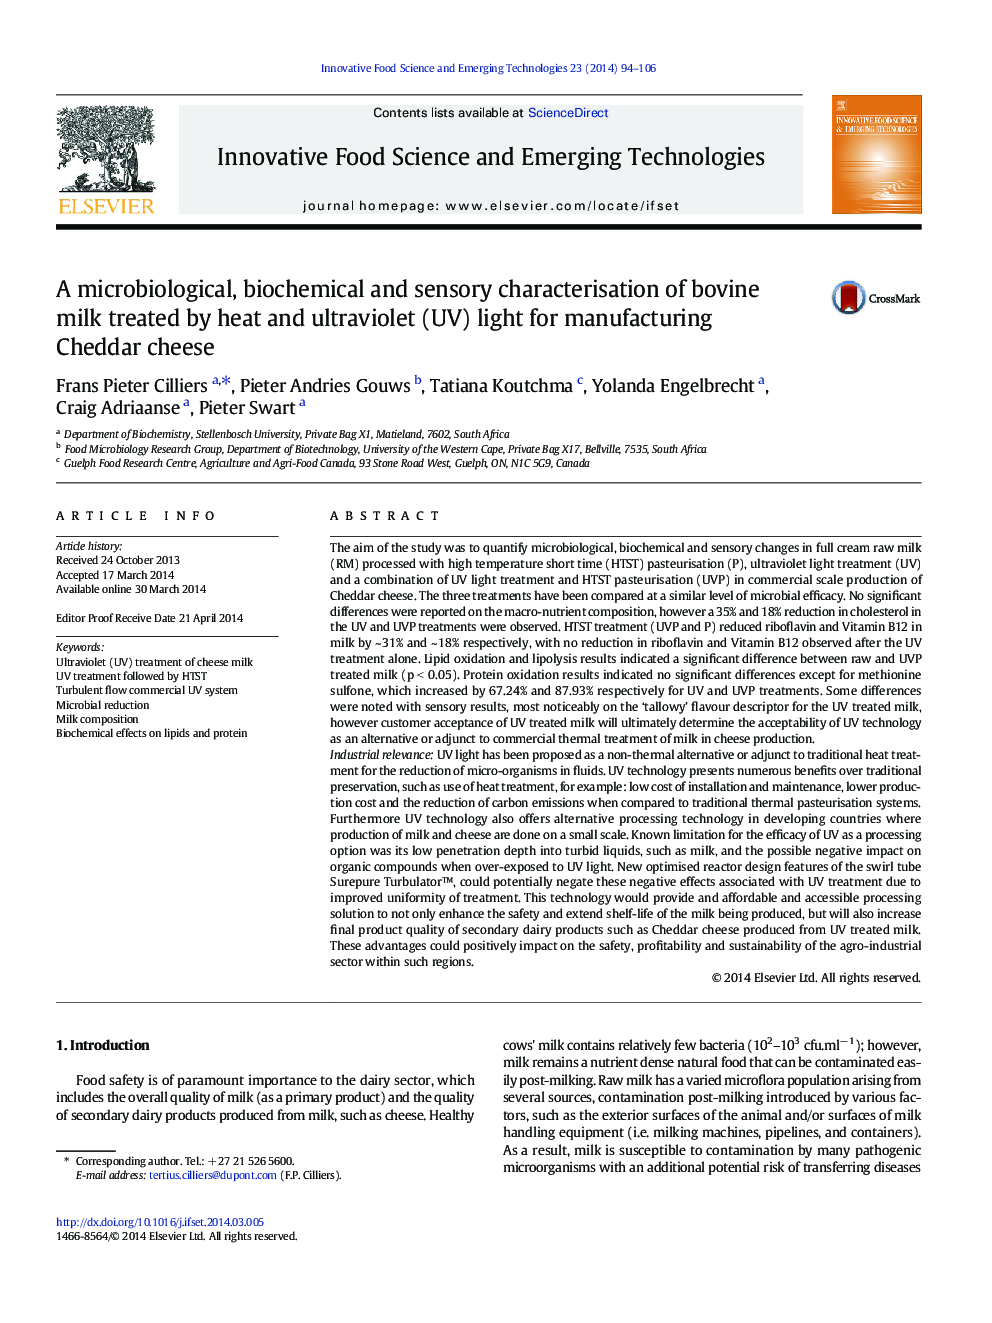 A microbiological, biochemical and sensory characterisation of bovine milk treated by heat and ultraviolet (UV) light for manufacturing Cheddar cheese